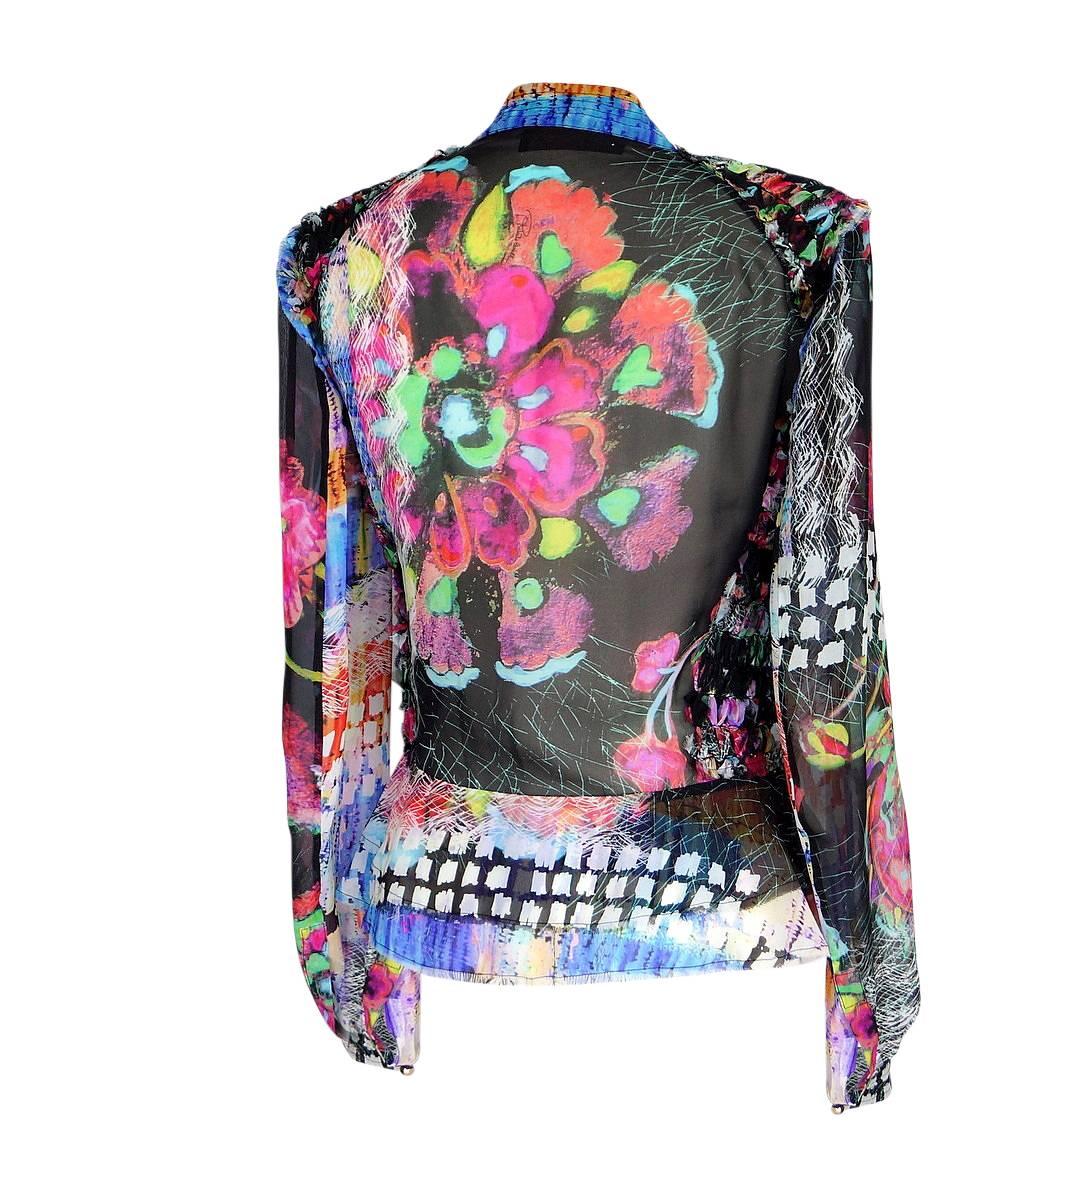 Roberto Cavalli Top Blouse Intricate Ribbon Vivid Colors 44 / 10 fits 8 For Sale 1